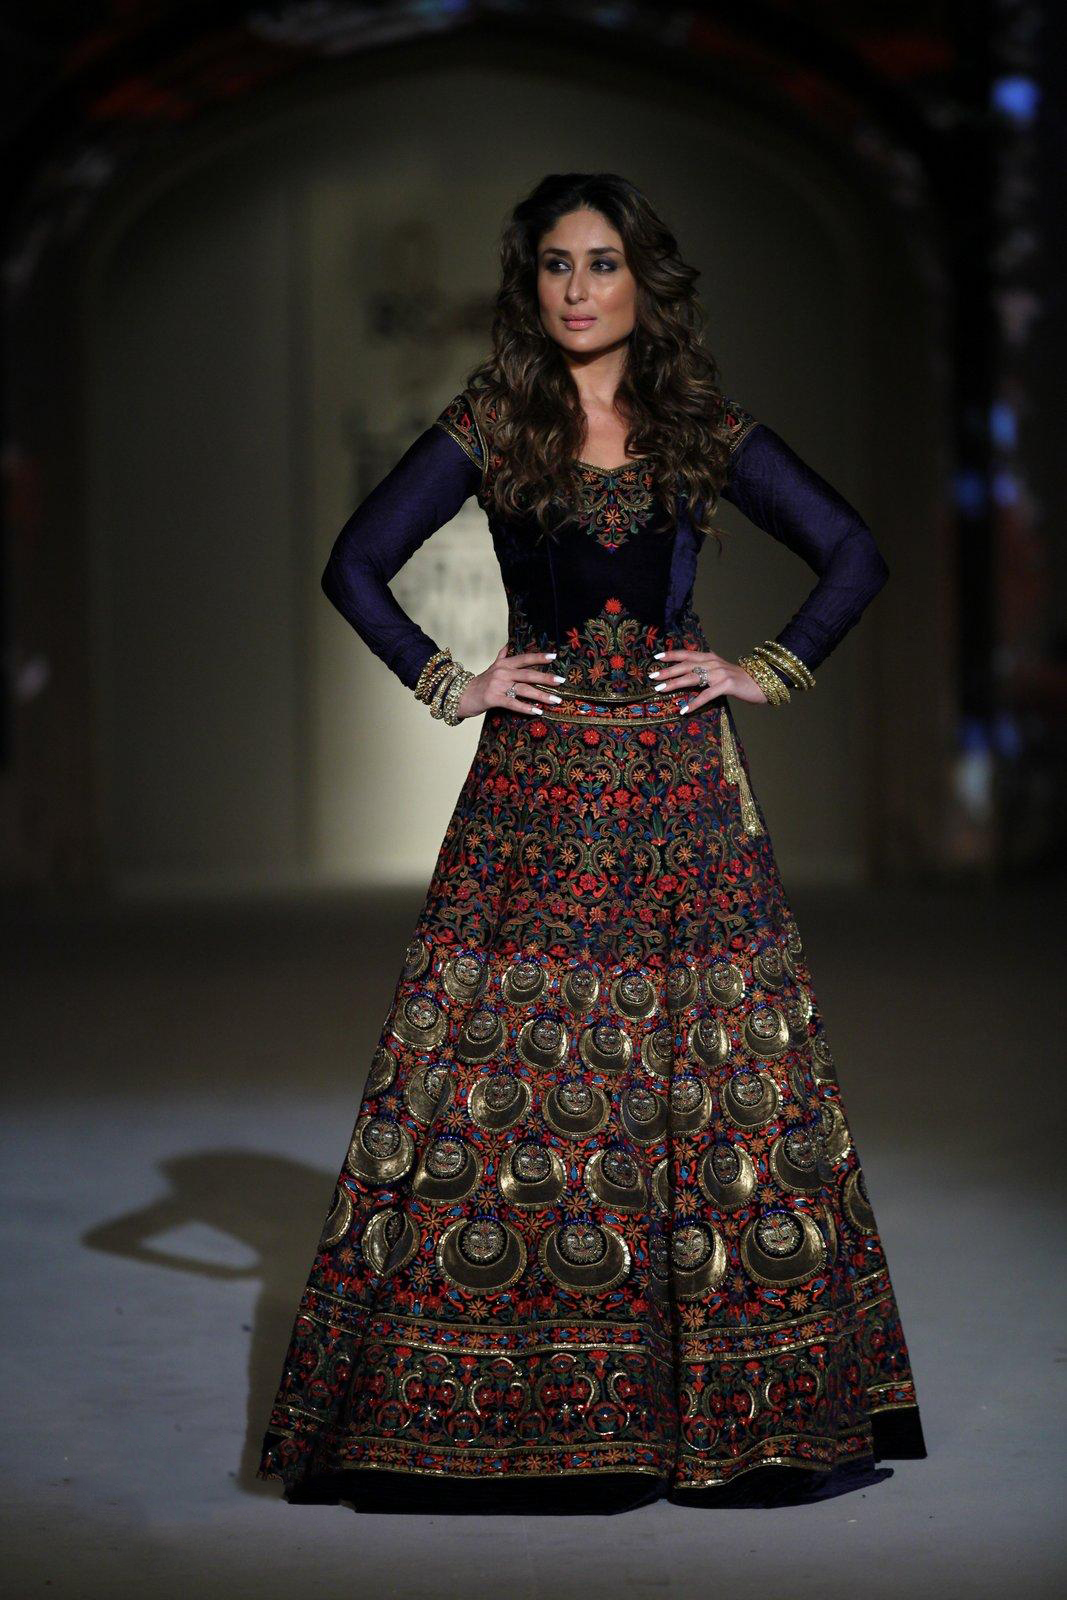 High Quality Bollywood Celebrity Pictures Kareena Kapoor Looks Smoking Hot As She Walks Ramp